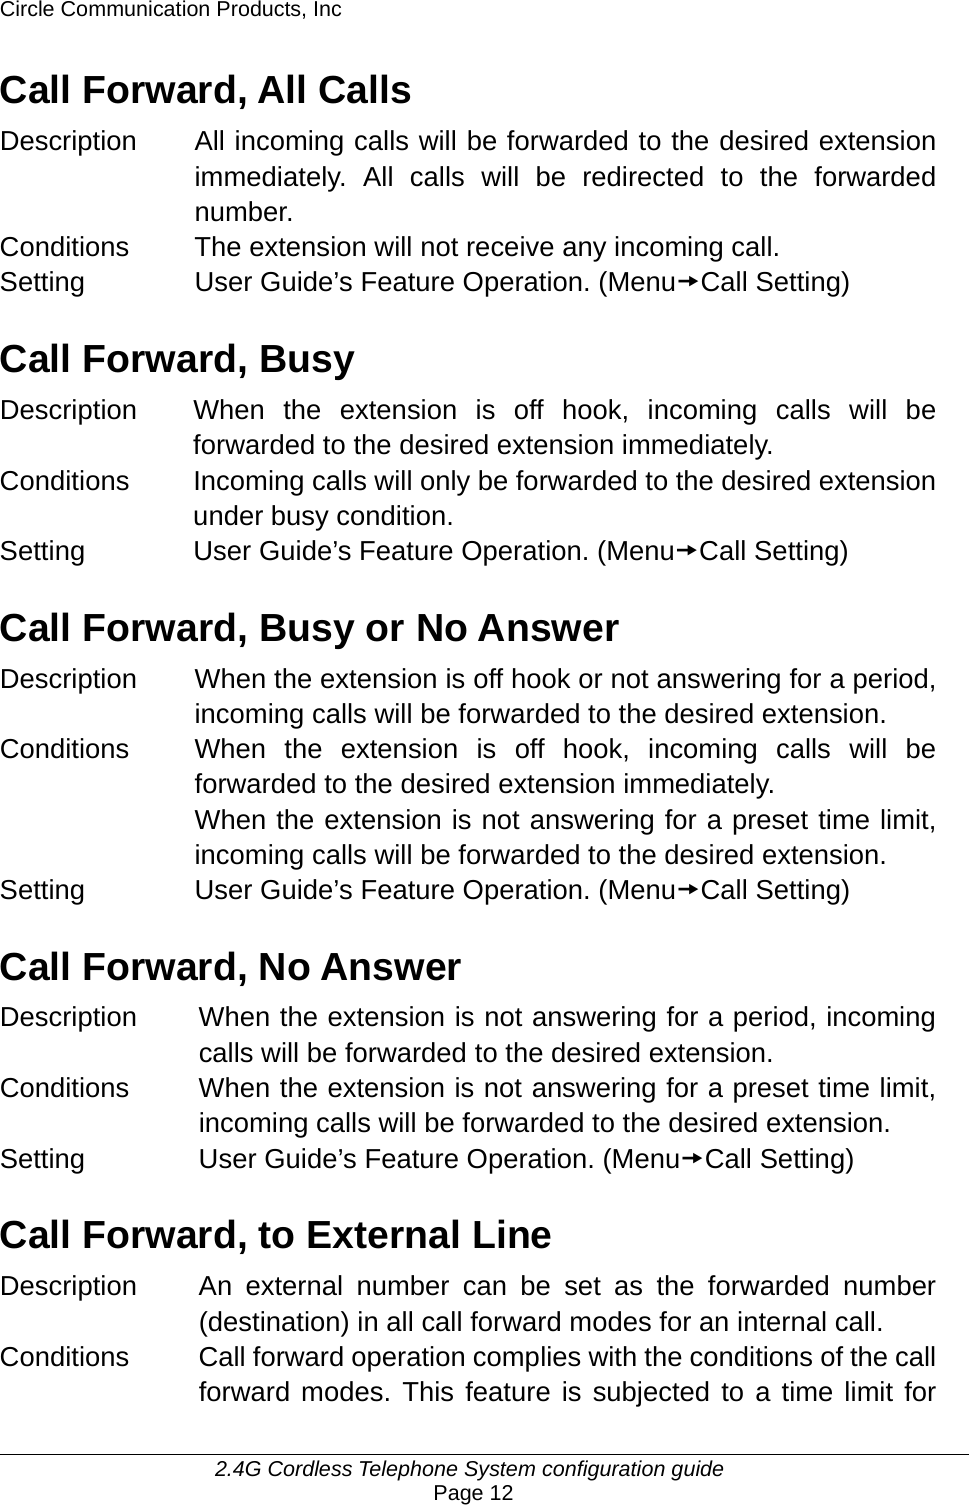 Circle Communication Products, Inc     2.4G Cordless Telephone System configuration guide Page 12 Call Forward, All Calls Description  All incoming calls will be forwarded to the desired extension immediately. All calls will be redirected to the forwarded number. Conditions  The extension will not receive any incoming call. Setting User Guide’s Feature Operation. (MenutCall Setting)  Call Forward, Busy Description  When the extension is off hook, incoming calls will be forwarded to the desired extension immediately. Conditions  Incoming calls will only be forwarded to the desired extension under busy condition. Setting User Guide’s Feature Operation. (MenutCall Setting)  Call Forward, Busy or No Answer Description  When the extension is off hook or not answering for a period, incoming calls will be forwarded to the desired extension. Conditions  When the extension is off hook, incoming calls will be forwarded to the desired extension immediately. When the extension is not answering for a preset time limit, incoming calls will be forwarded to the desired extension. Setting User Guide’s Feature Operation. (MenutCall Setting)  Call Forward, No Answer Description  When the extension is not answering for a period, incoming calls will be forwarded to the desired extension. Conditions  When the extension is not answering for a preset time limit, incoming calls will be forwarded to the desired extension. Setting  User Guide’s Feature Operation. (MenutCall Setting)  Call Forward, to External Line Description  An external number can be set as the forwarded number (destination) in all call forward modes for an internal call. Conditions  Call forward operation complies with the conditions of the call forward modes. This feature is subjected to a time limit for 